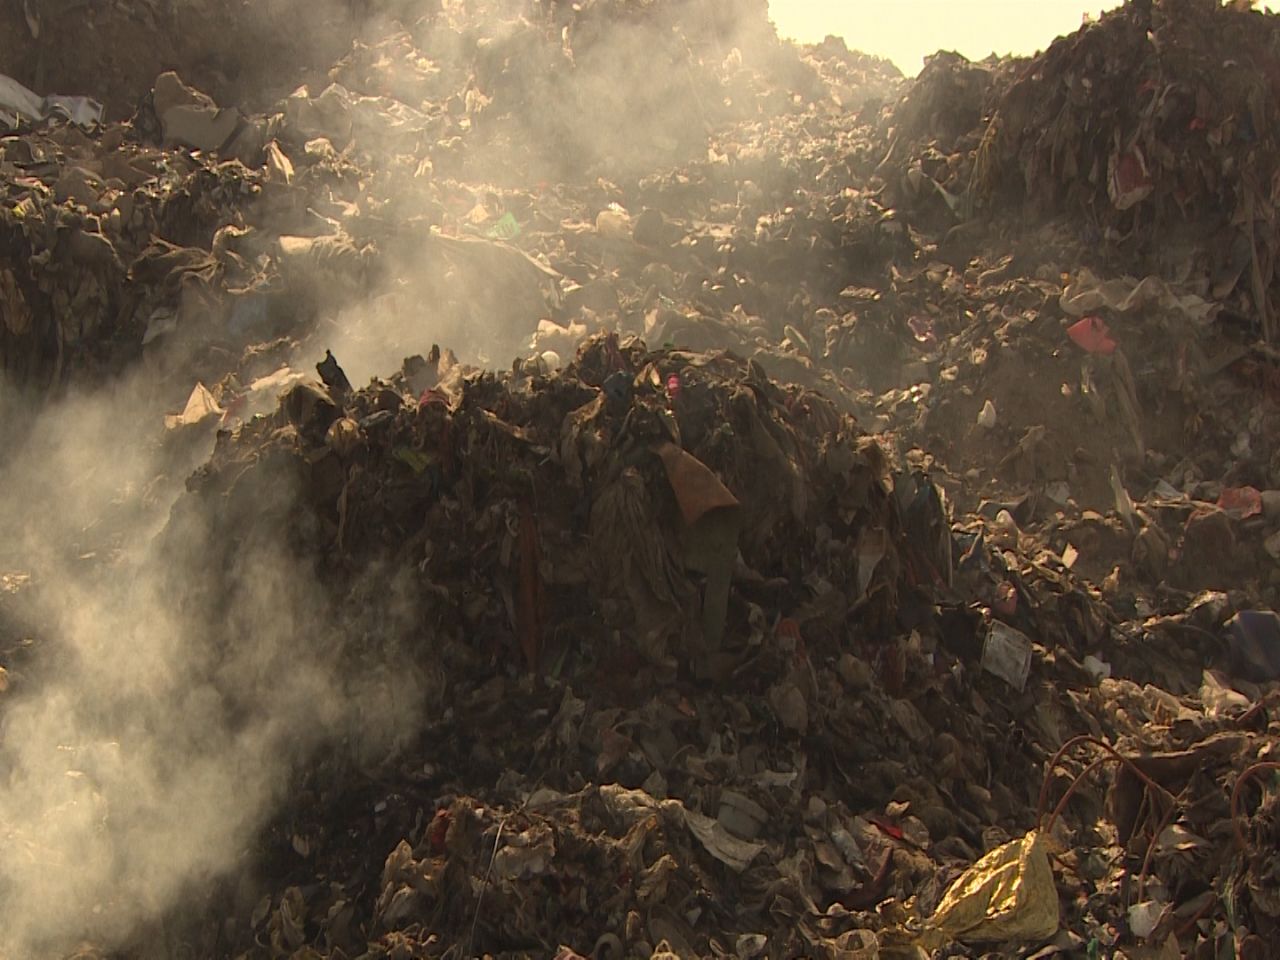 The dump receives 4,000 tons of trash a day, the government says. 